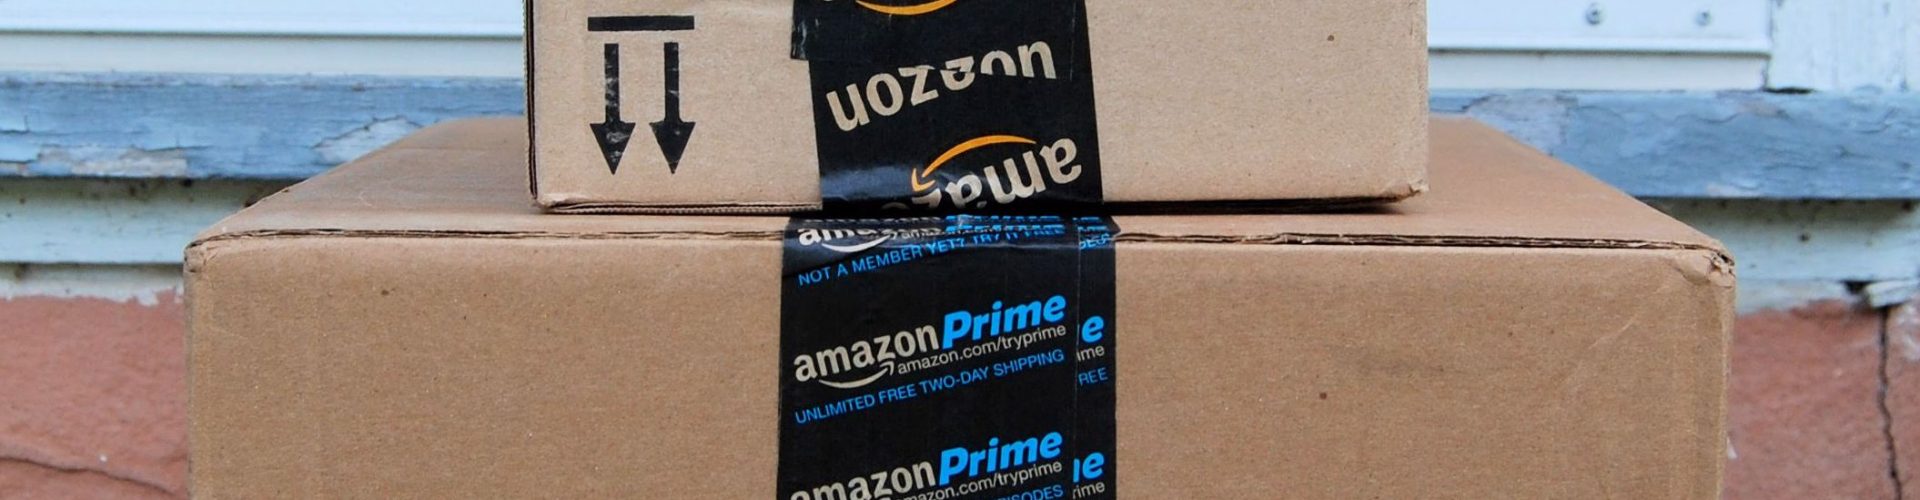 Hagerstown, MD, USA - June 2, 2014: Image of an Amazon packages. Amazon is an online company and is the largest retailer in the world.